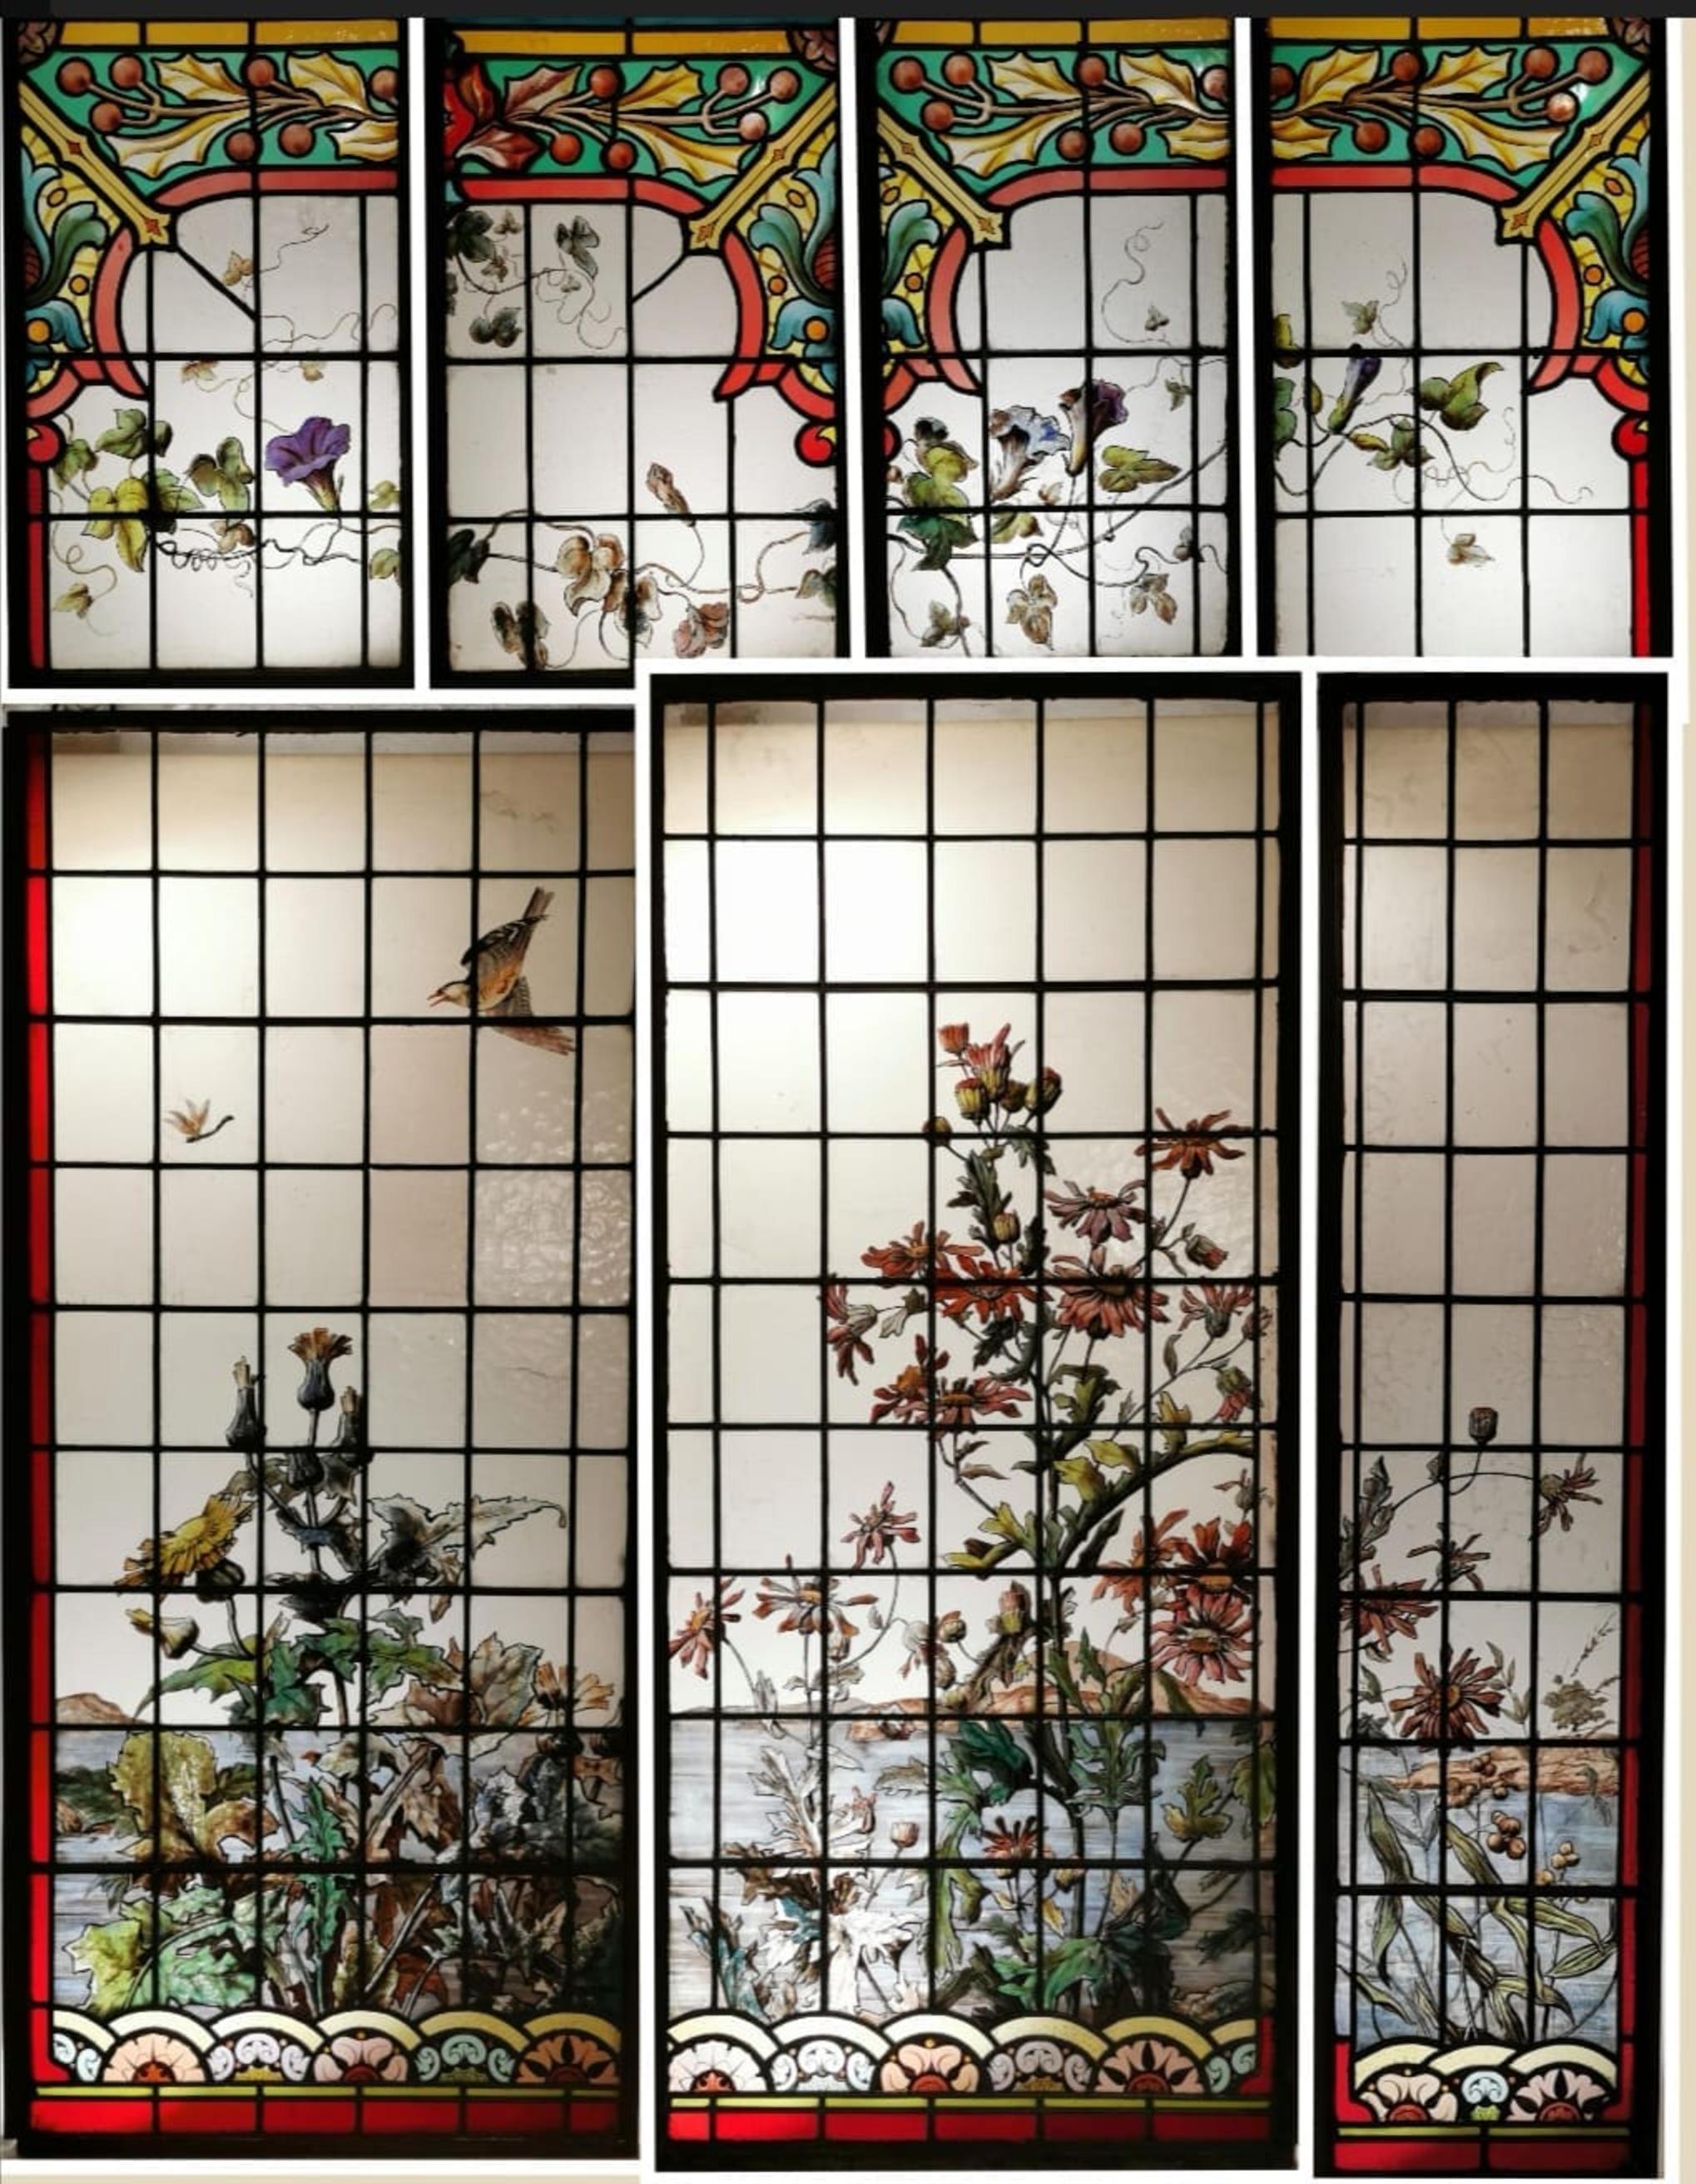 Large window from the late 19th century attributed to champigneulle
Painted in grisaille with plant decorations on a Japanese background, birds, insects typical of the period
It is made up of 16 panels for a length of 560 cm by 250 cm in height or